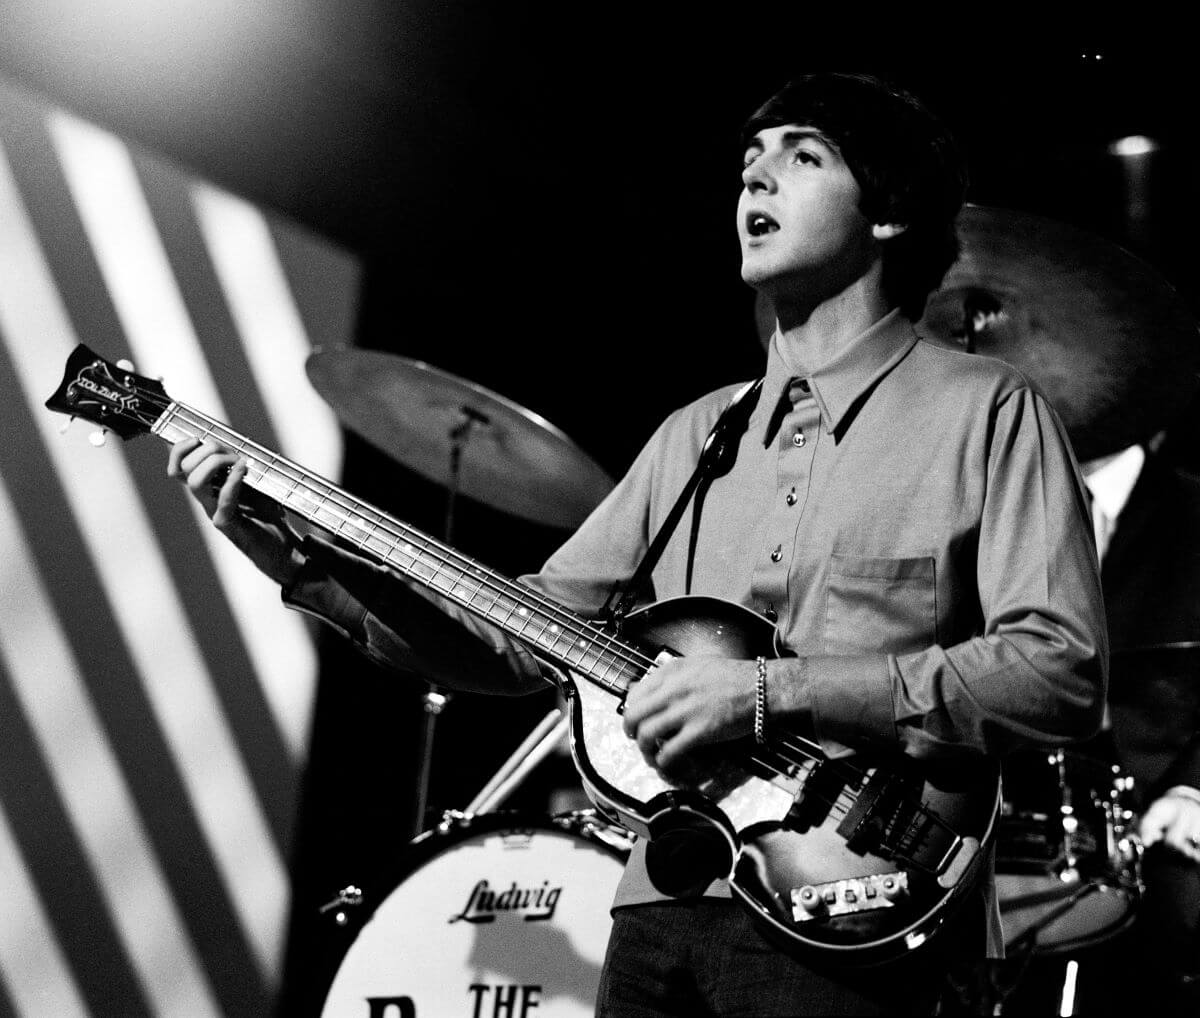 A black and white picture of Paul McCartney standing in front of a drum set and holding a guitar.